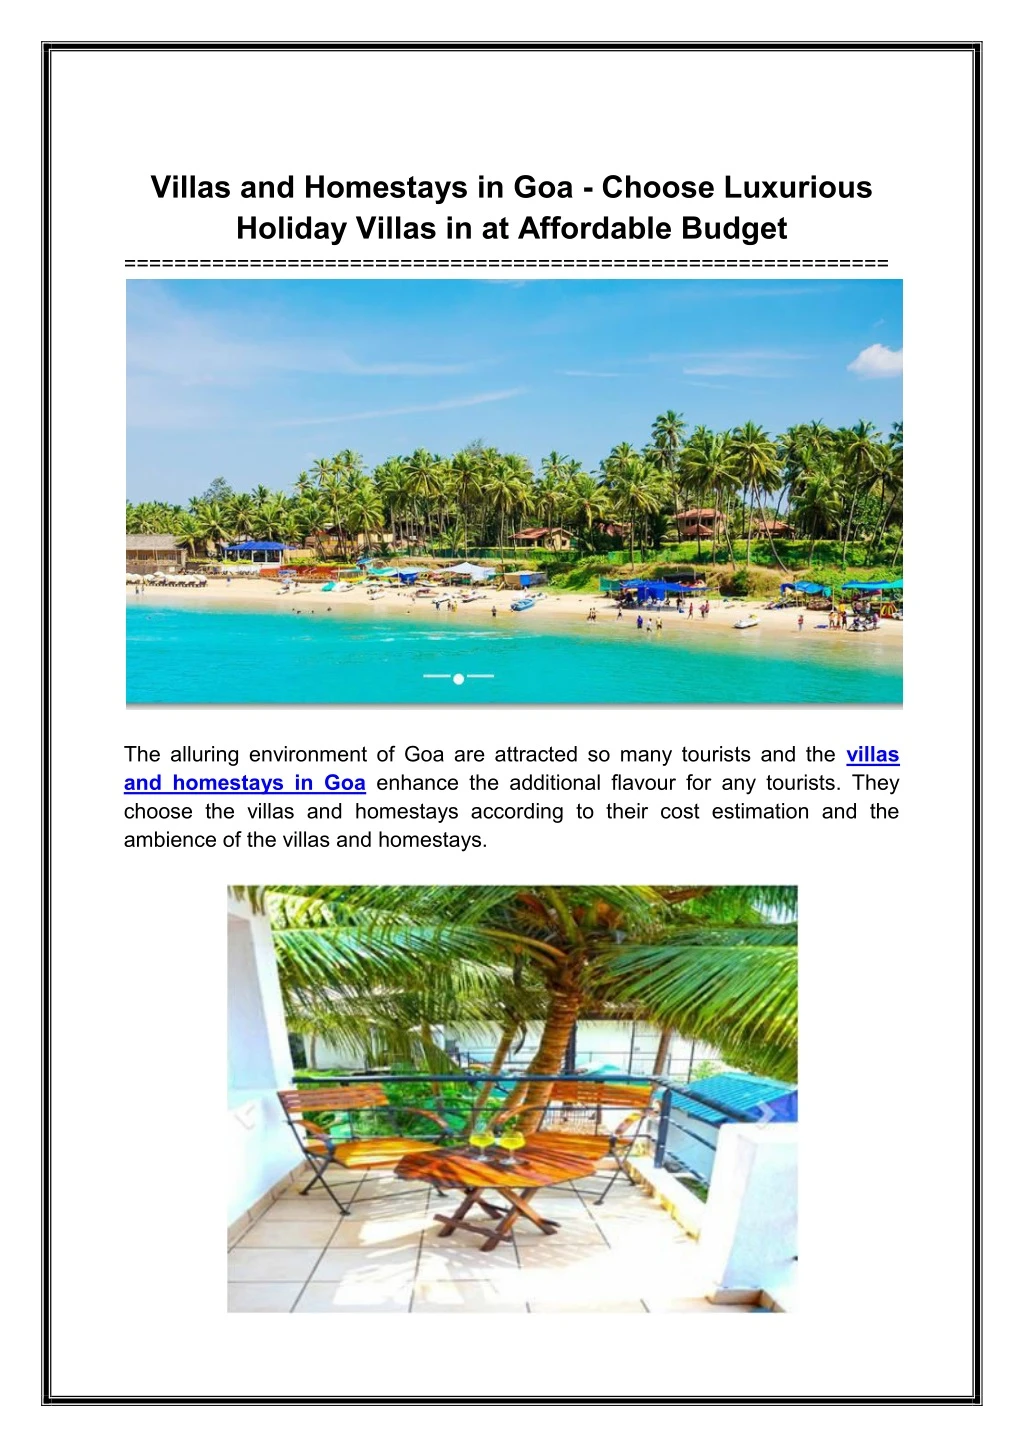 villas and homestays in goa choose luxurious